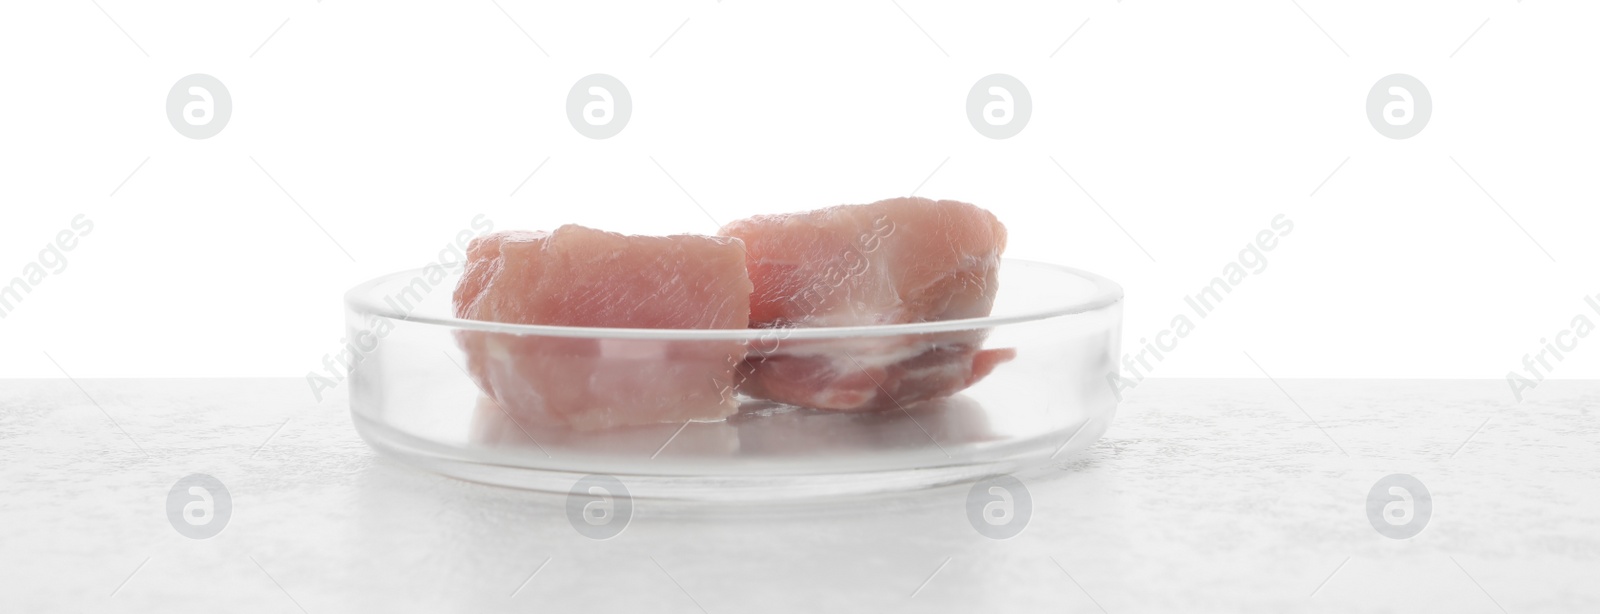 Photo of Petri dish with pieces of raw cultured meat on table against white background